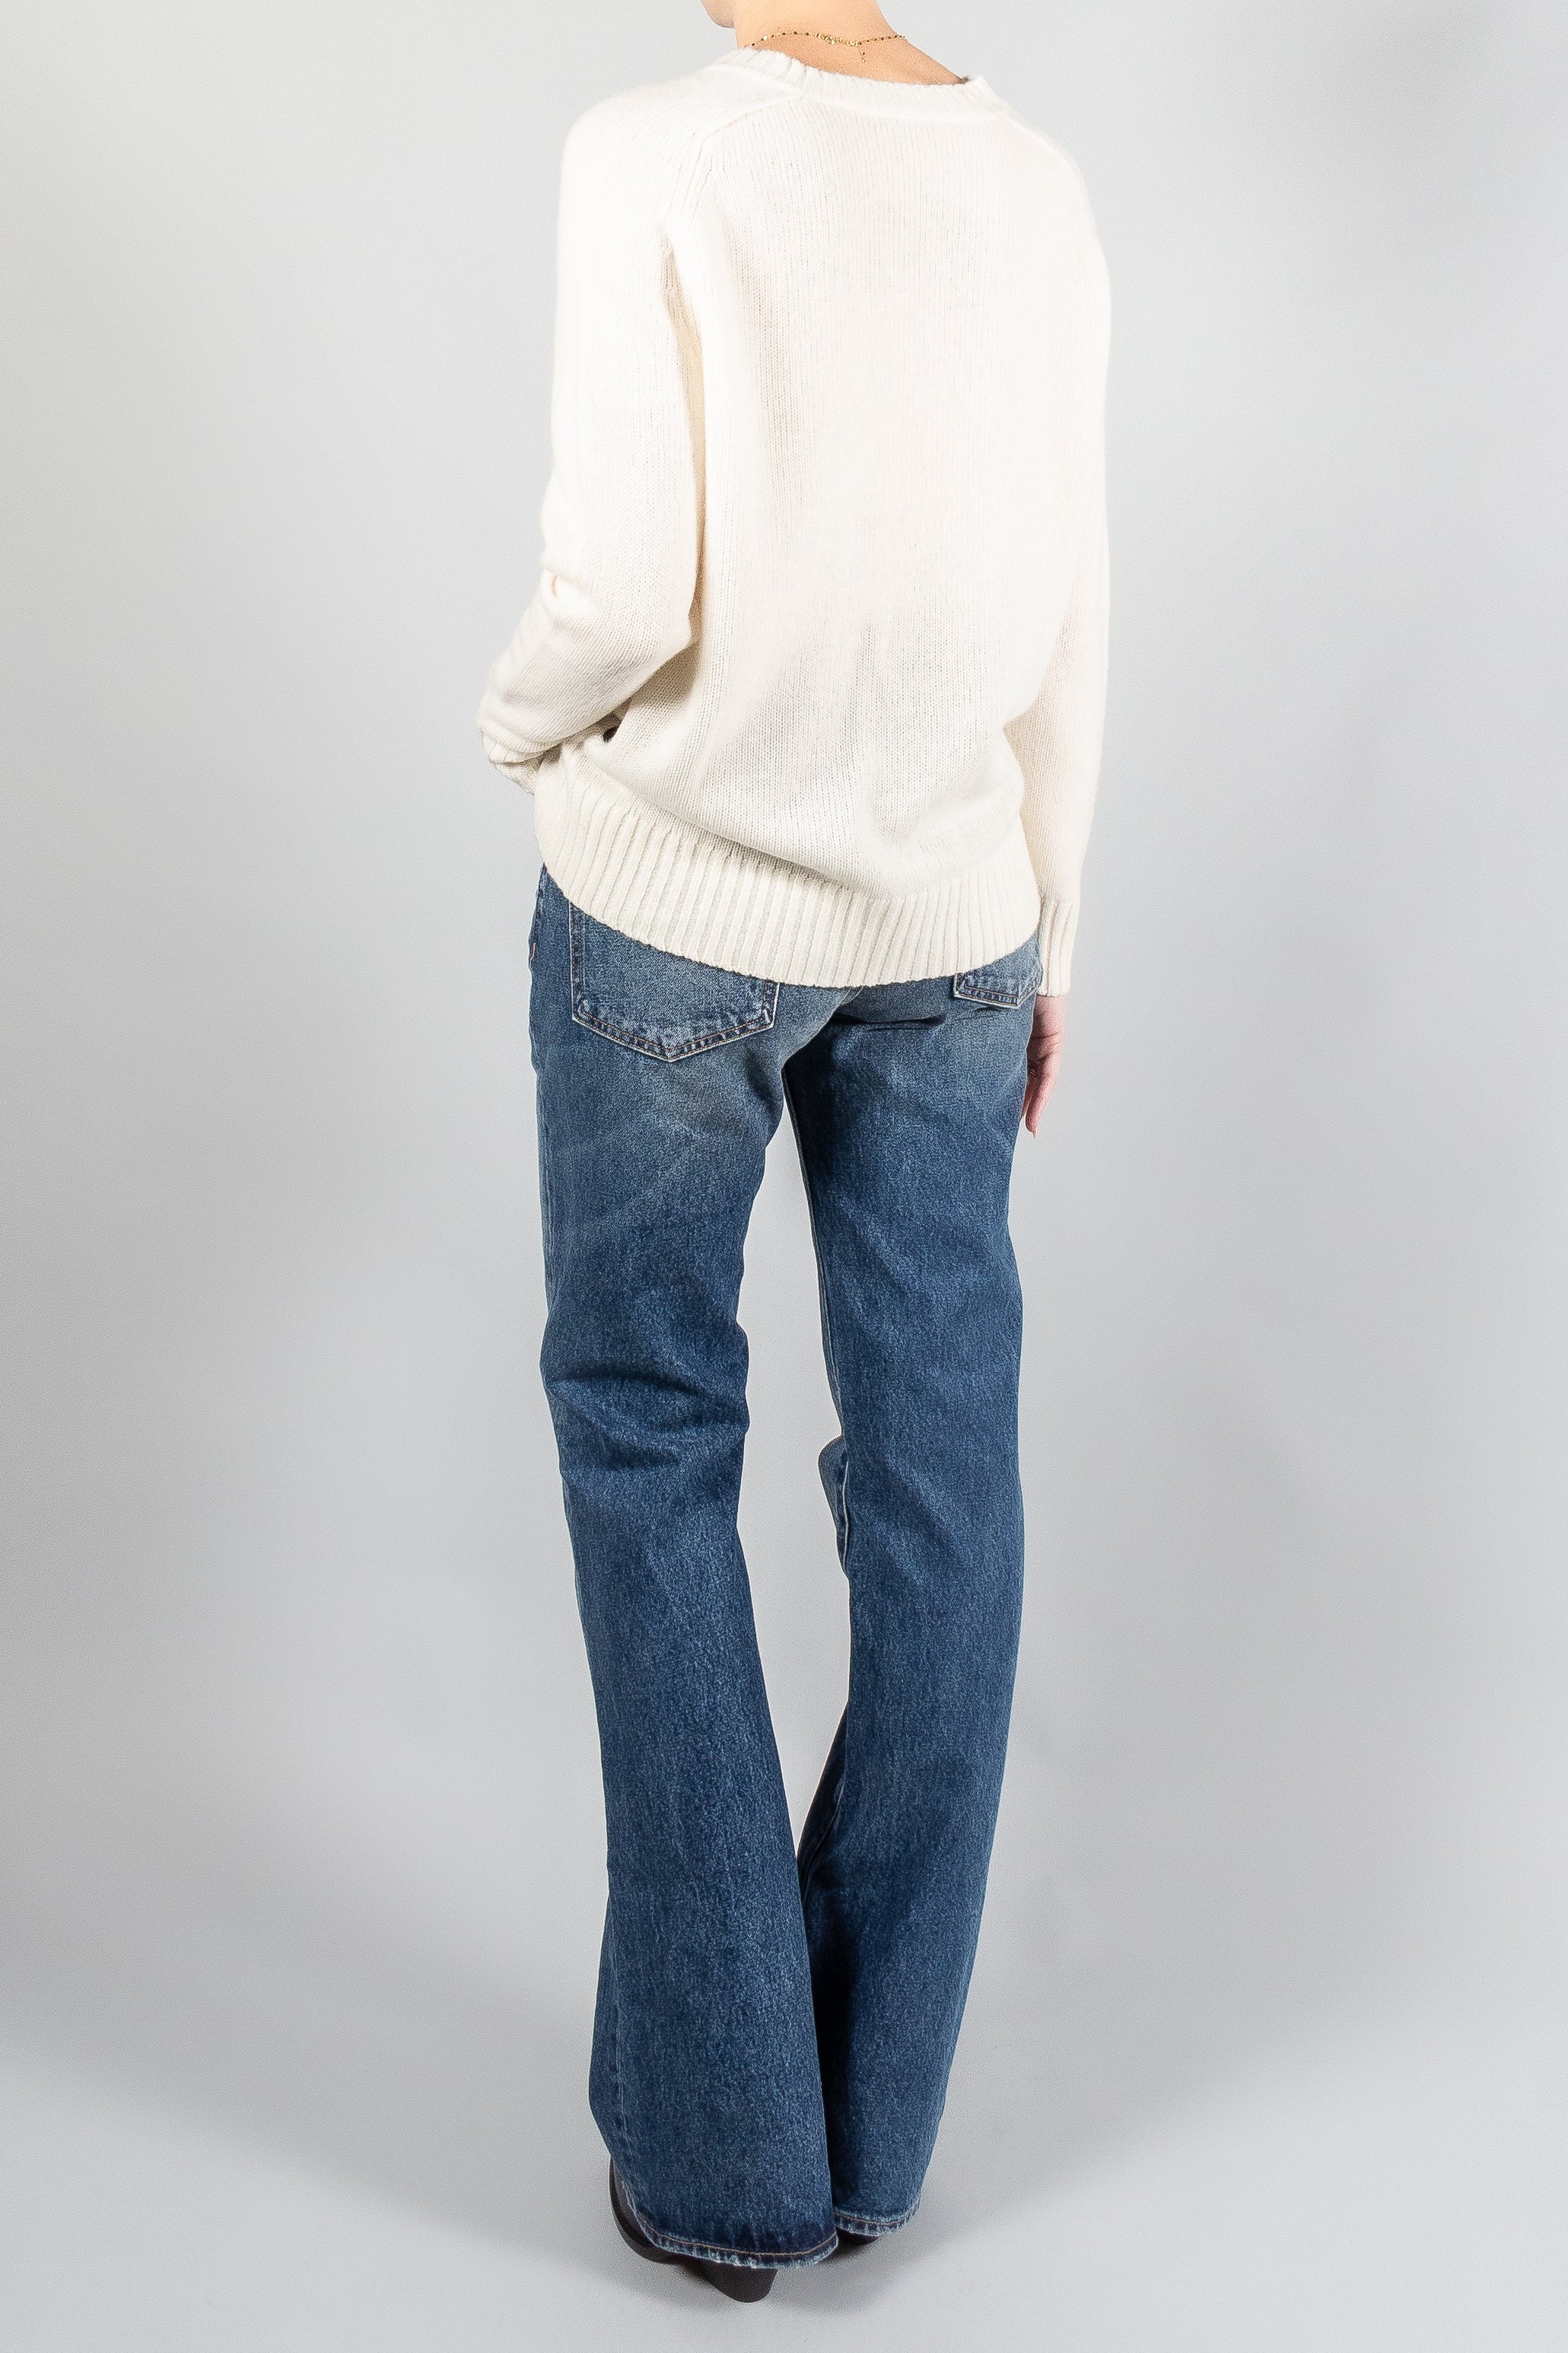 Joseph V Nk Open Cashmere - Ivory-Shirts & Tops-Misch-Boutique-Vancouver-Canada-misch.ca